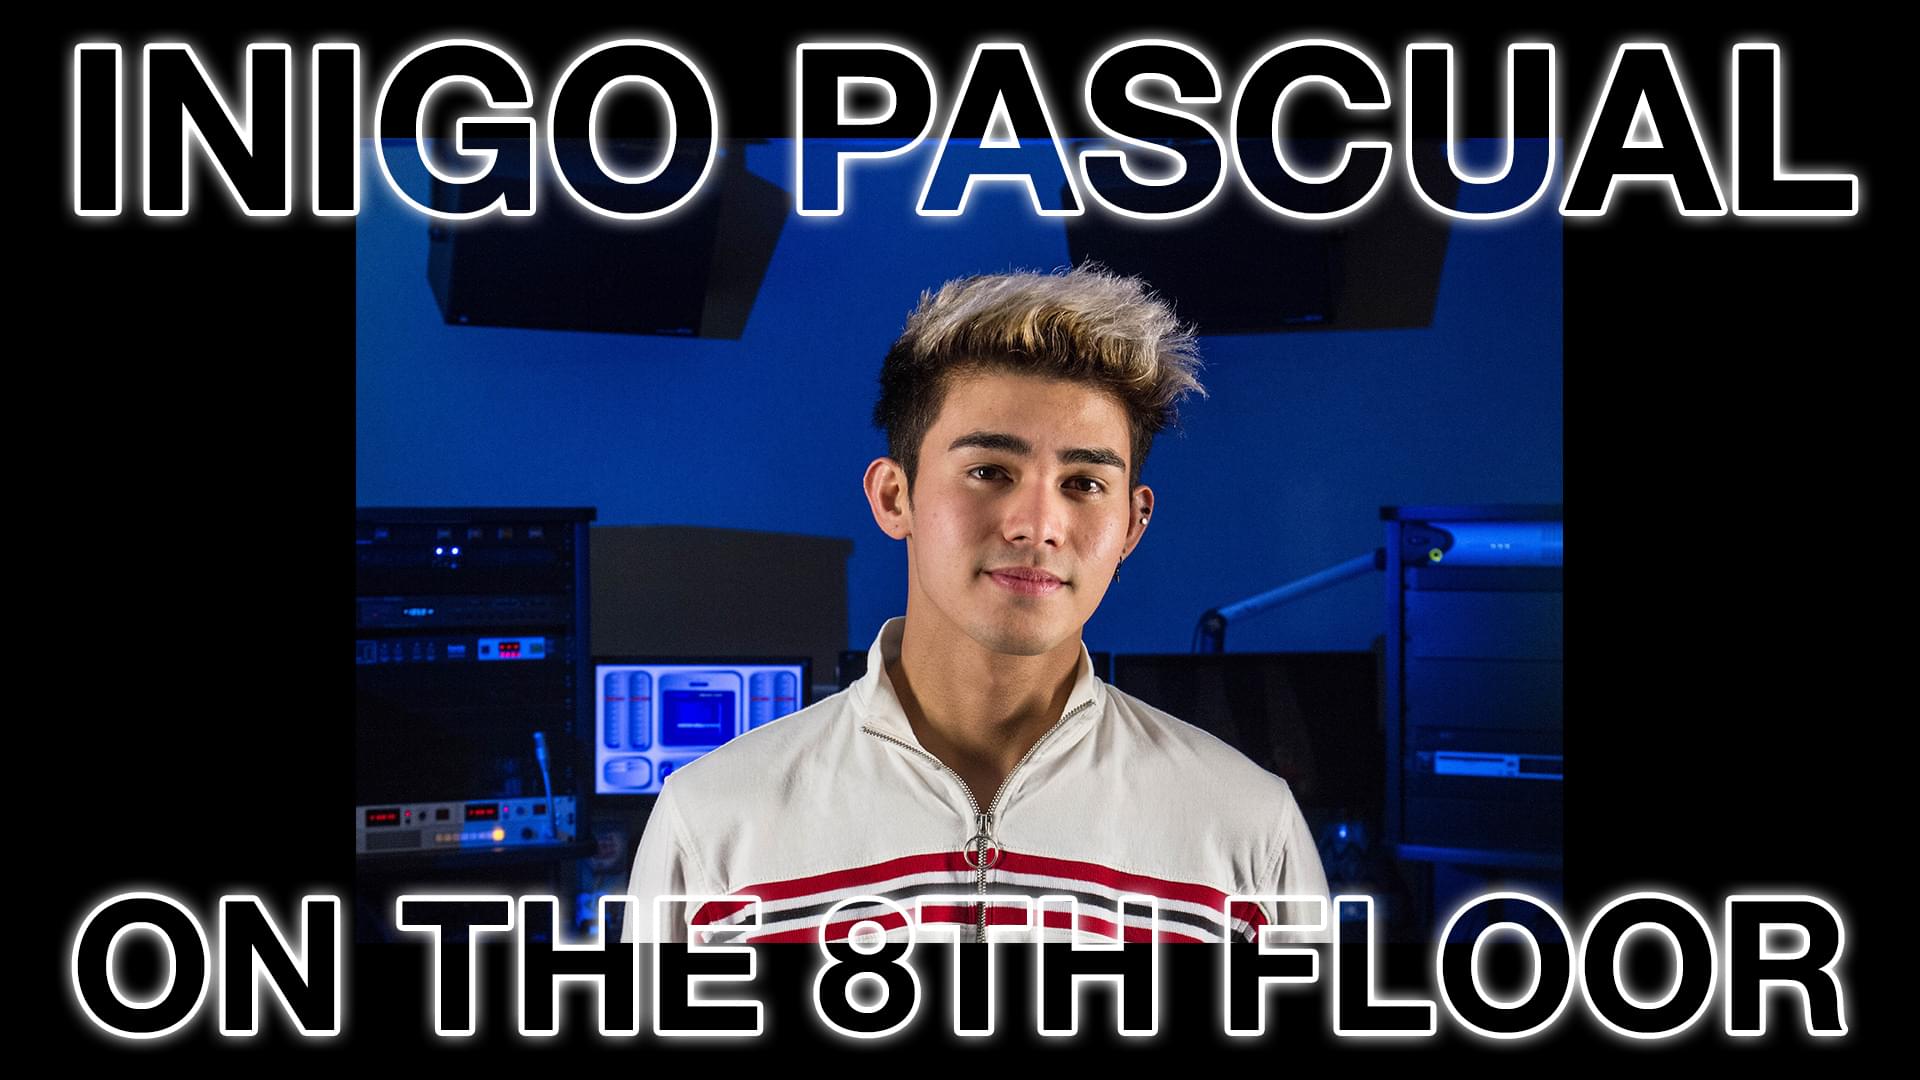 Inigo Pascual Performs “OPTIONS” LIVE #OnThe8thFloor [WATCH]